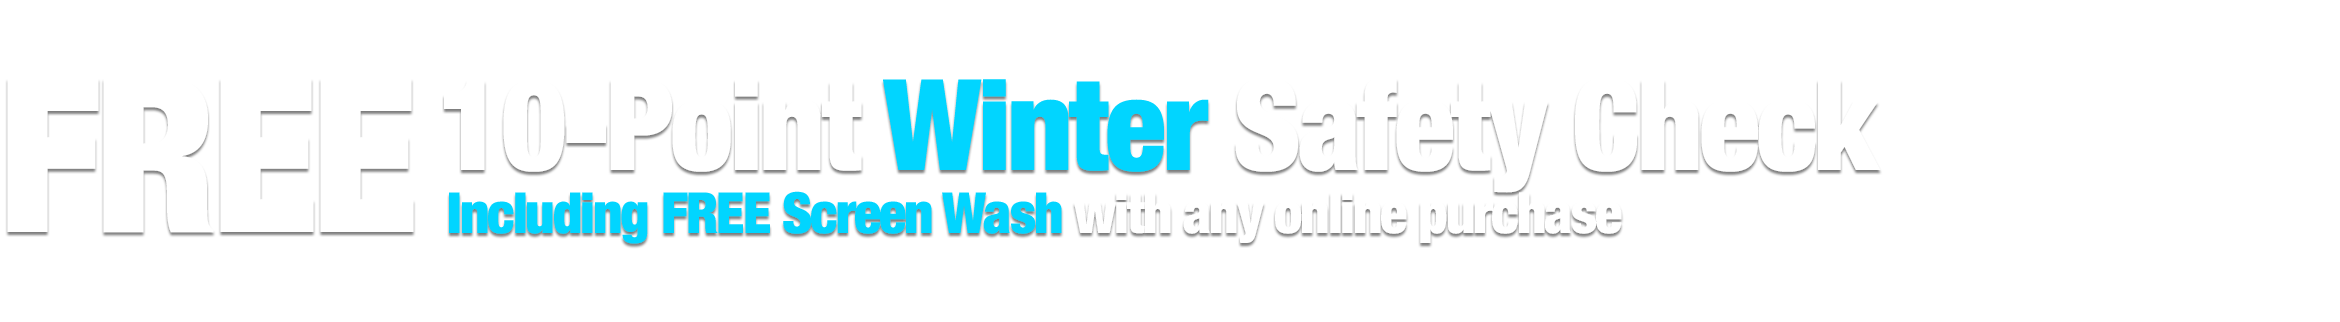 Free 10-Point Winter Safety Check including FREE Screen Wash with any online order